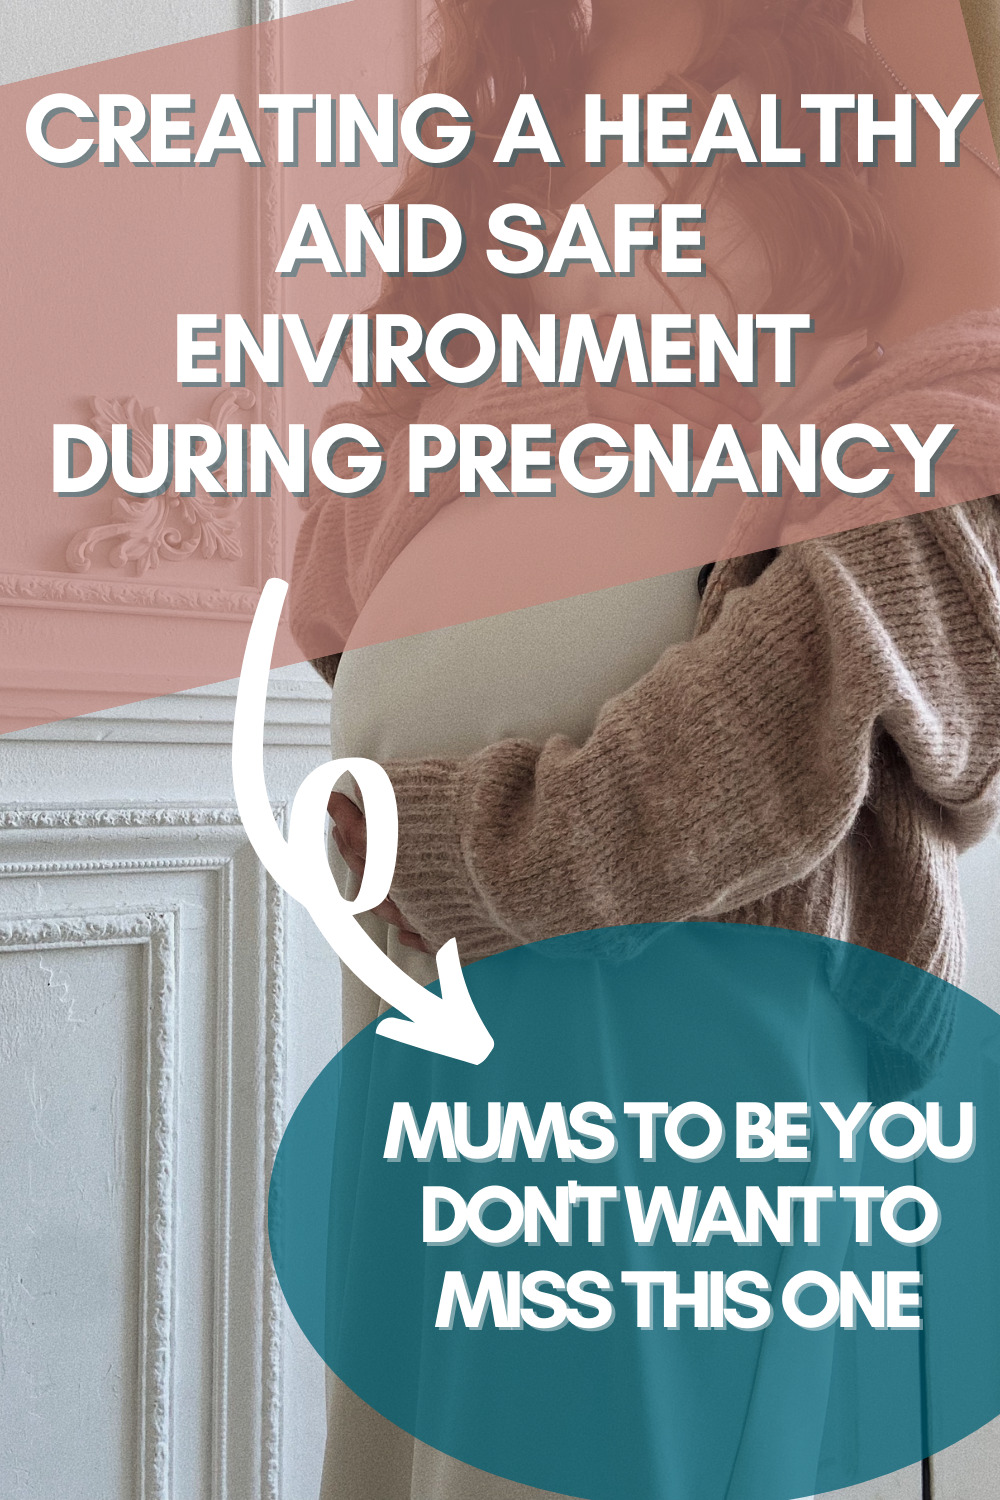 Creating a healthy and safe environment during pregnancy